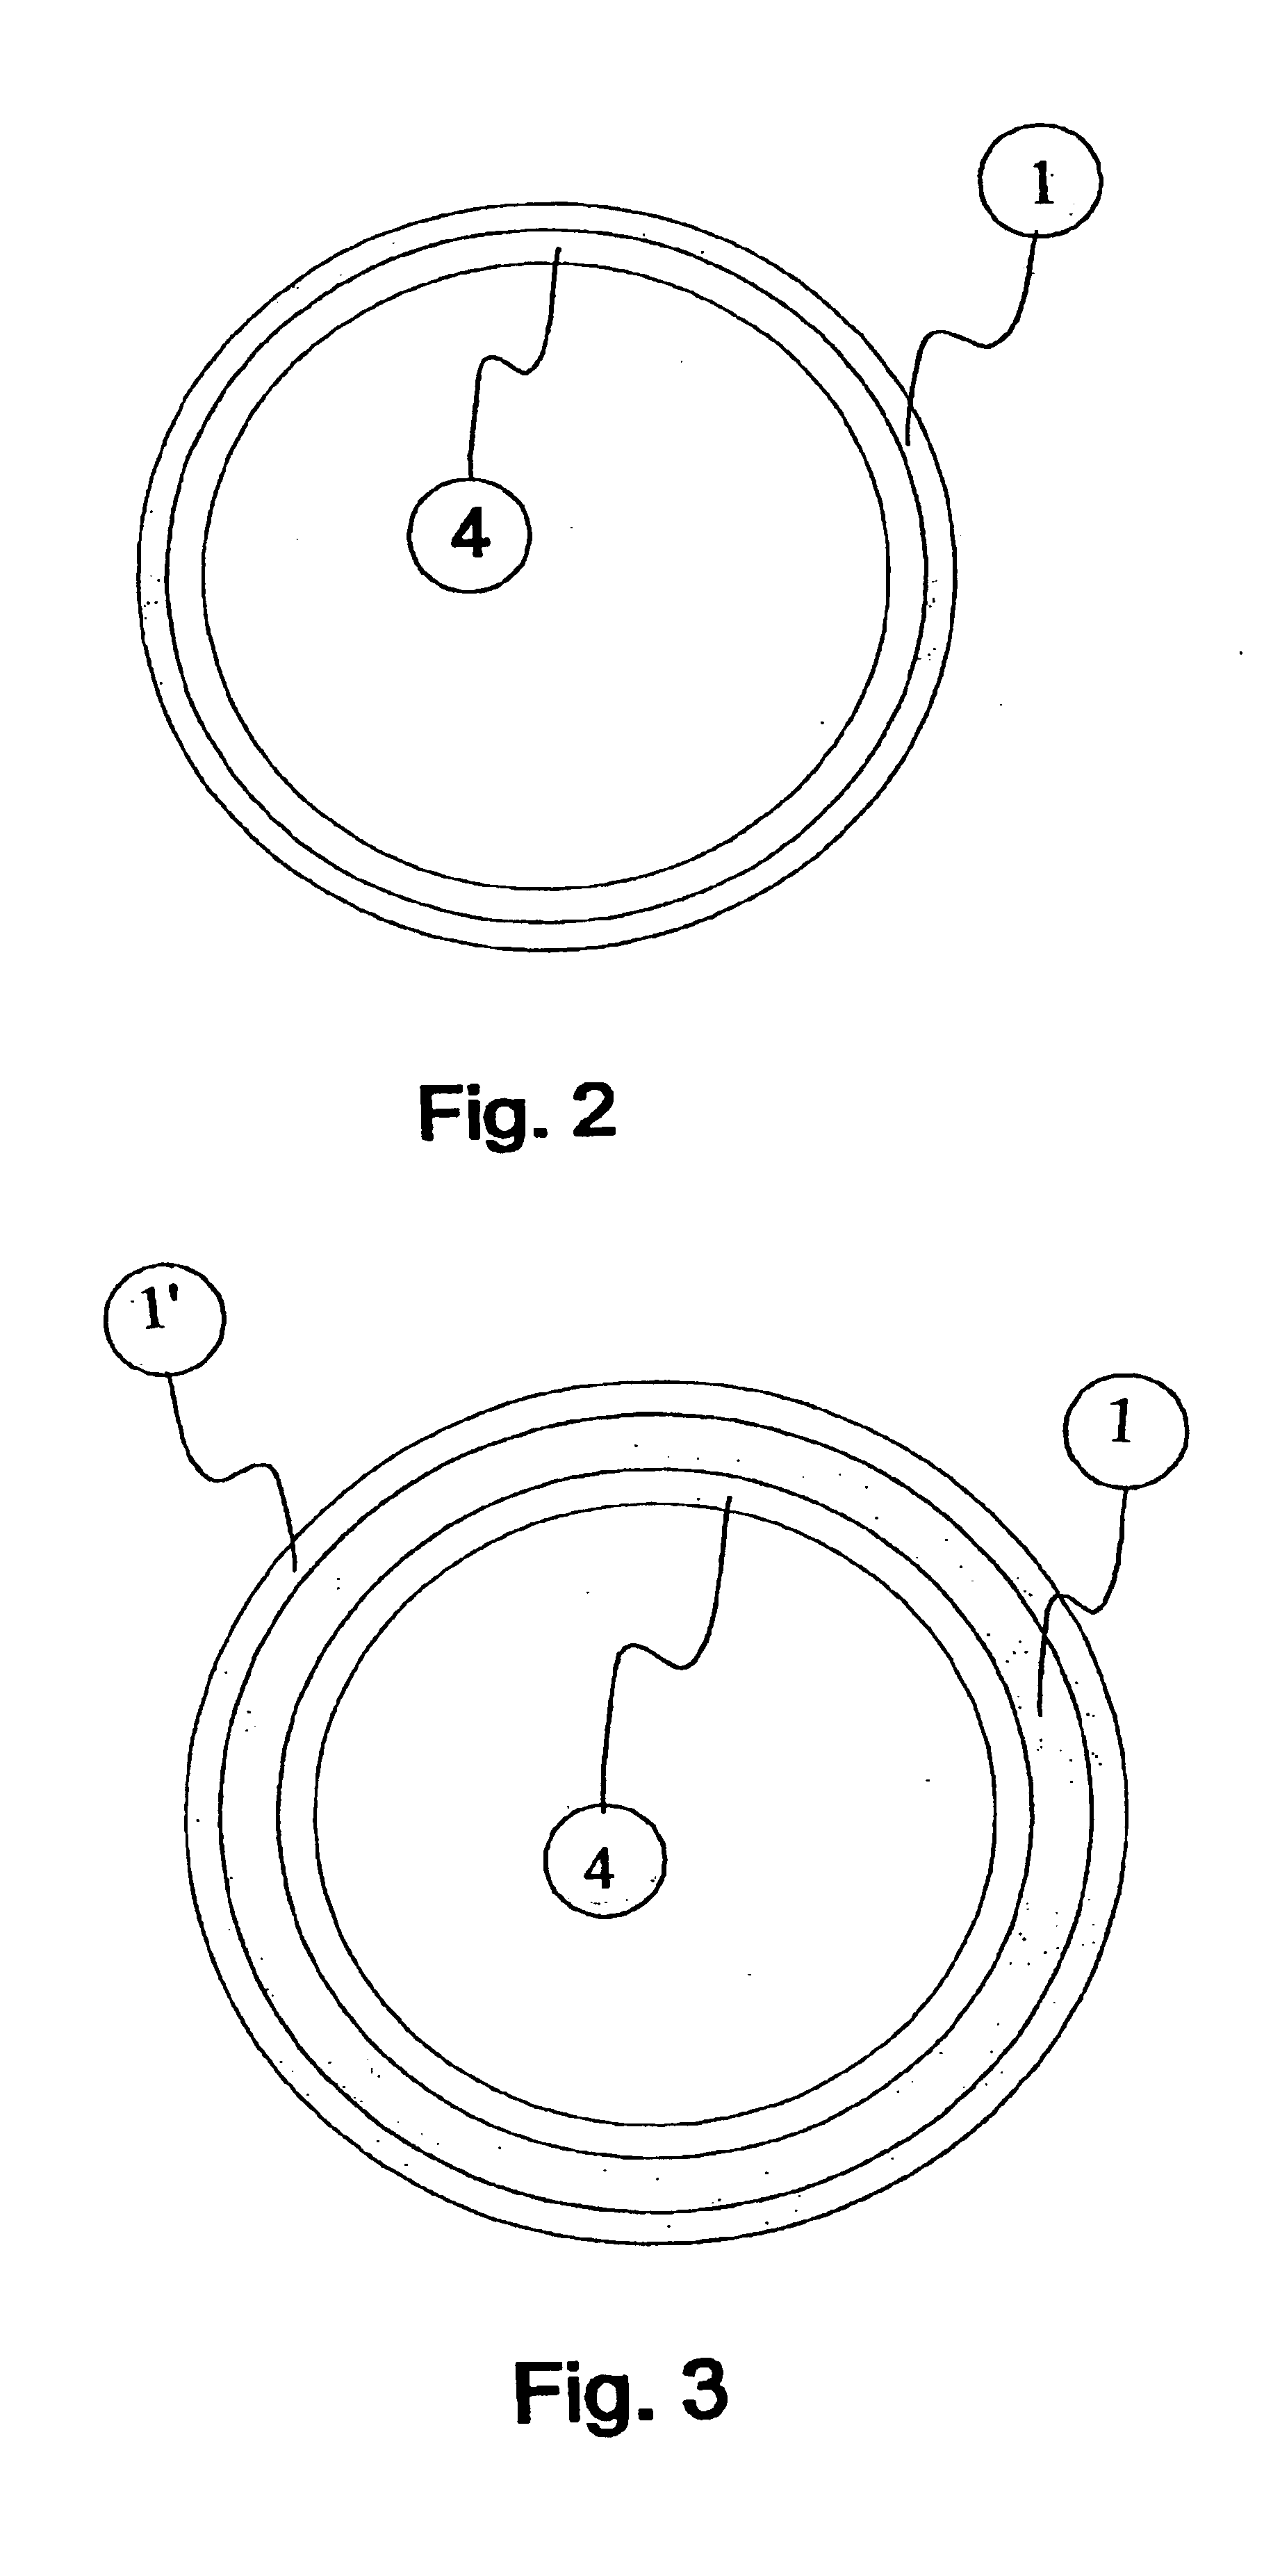 Integral passive shim system for a magnetic resonance apparatus